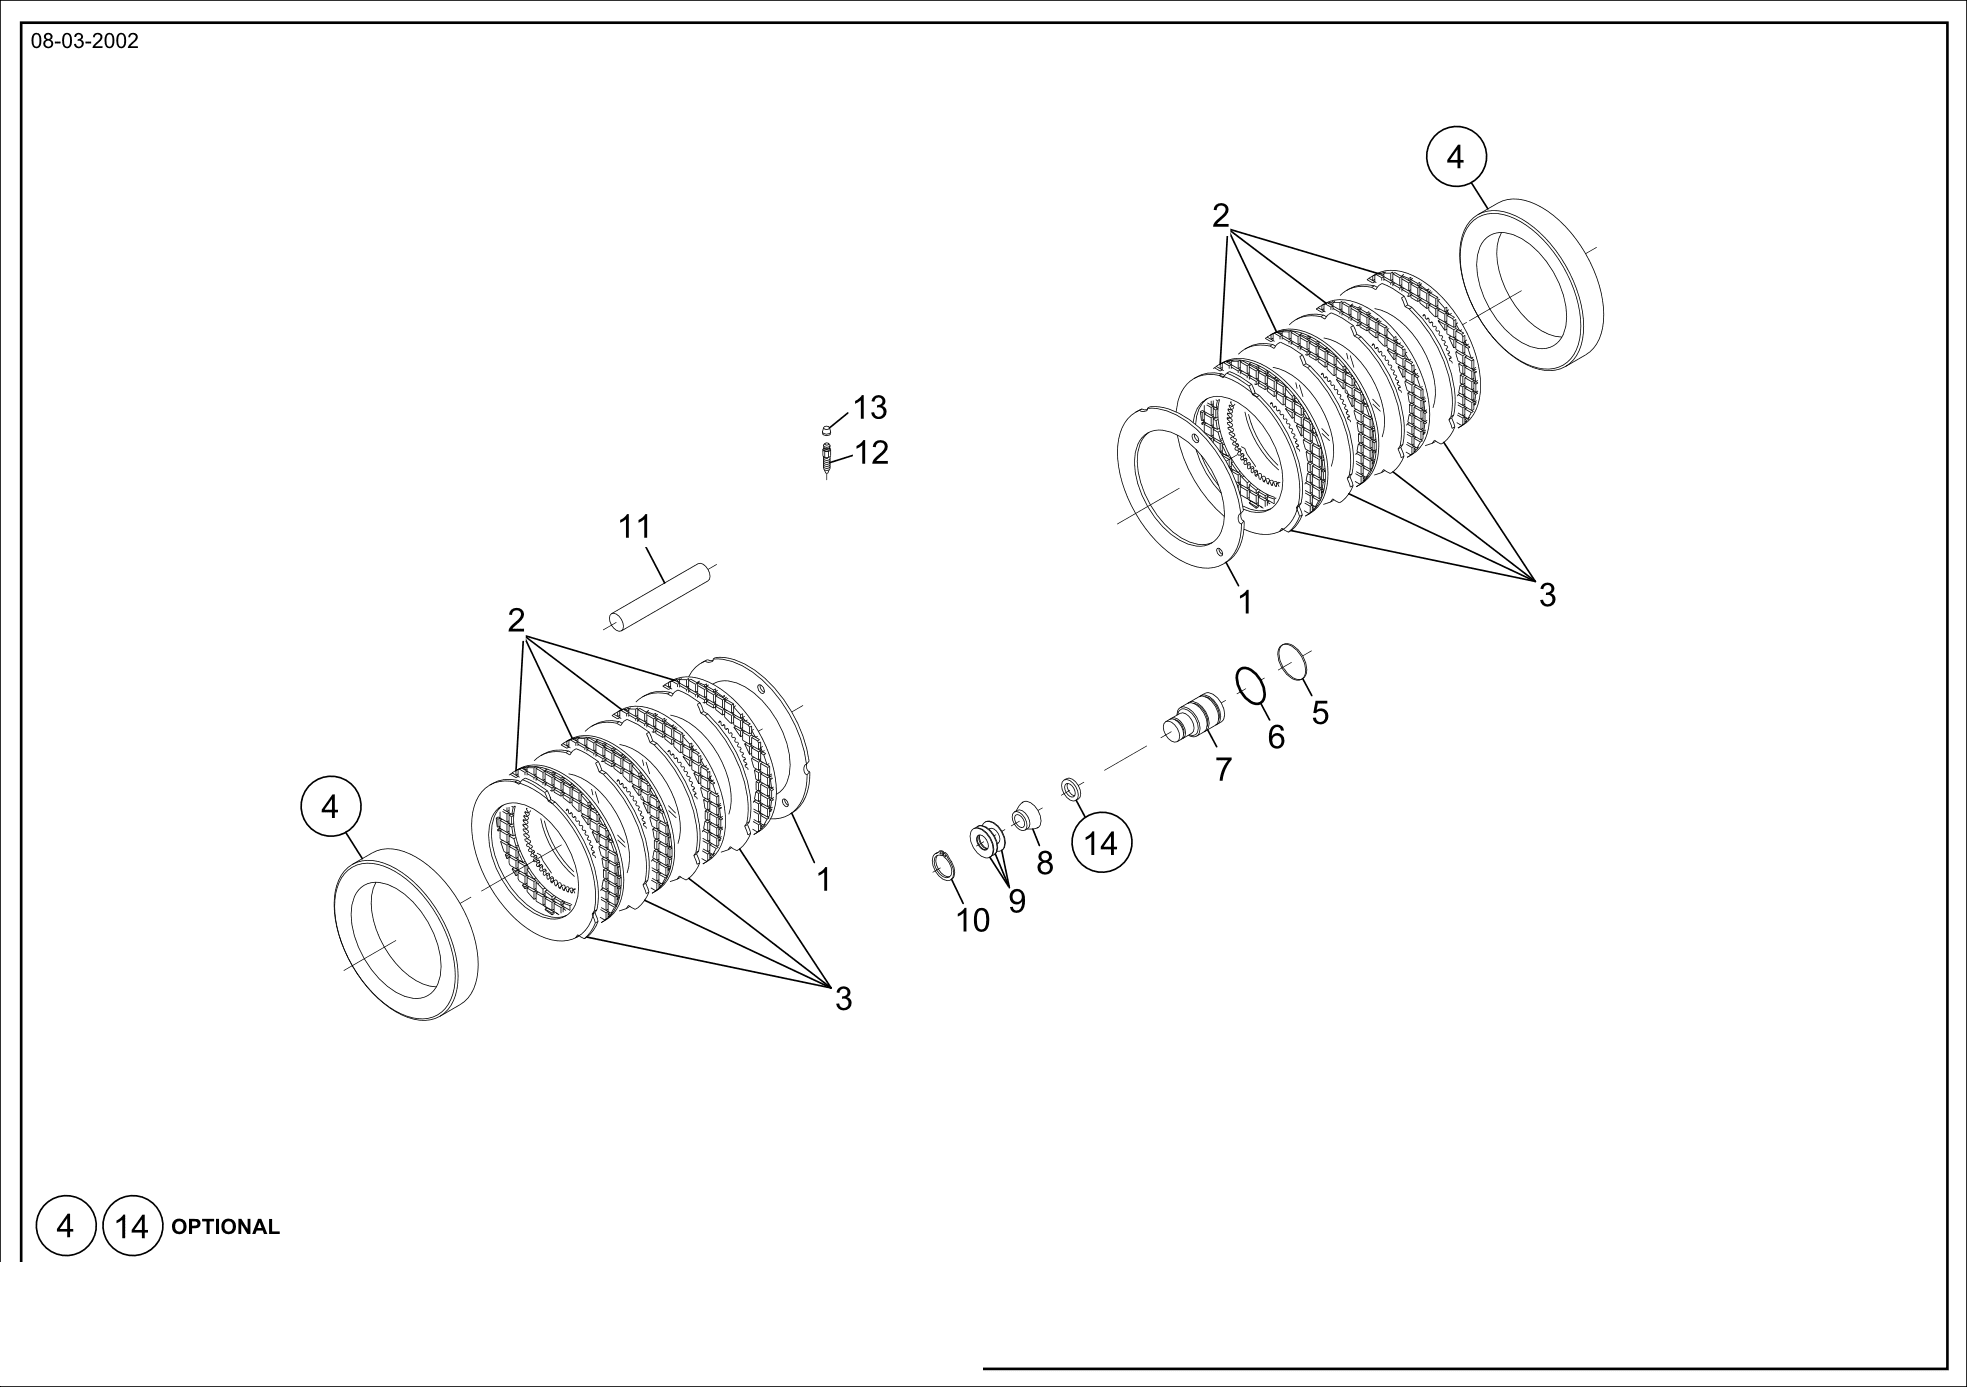 drawing for SHUTTLELIFT 1000959 - CIRCLIP (figure 4)